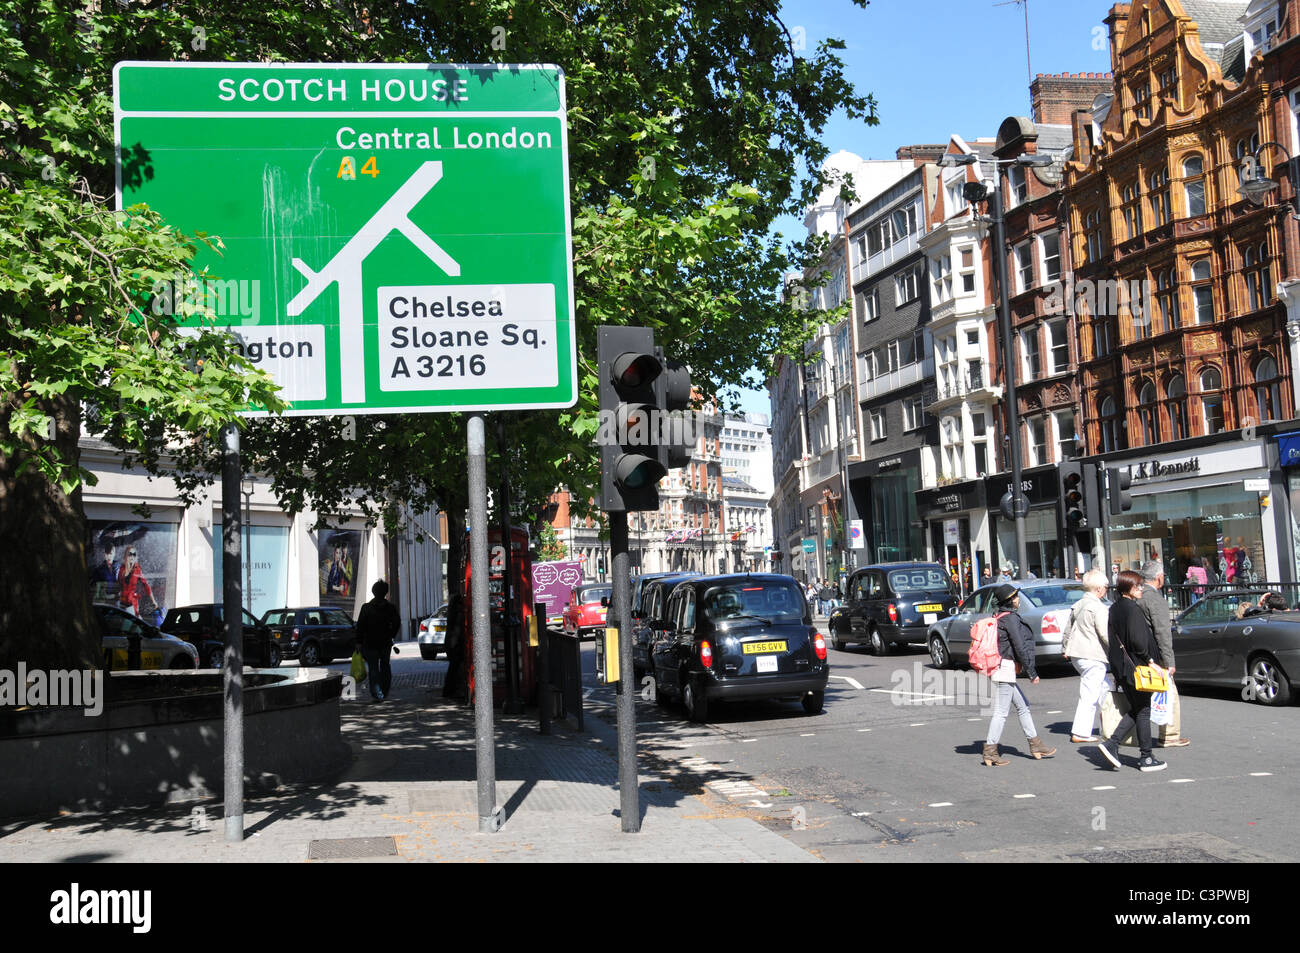 Scotch House street sign Knightsbridge Central London chelsea sloane square street sign traffic taxis Stock Photo